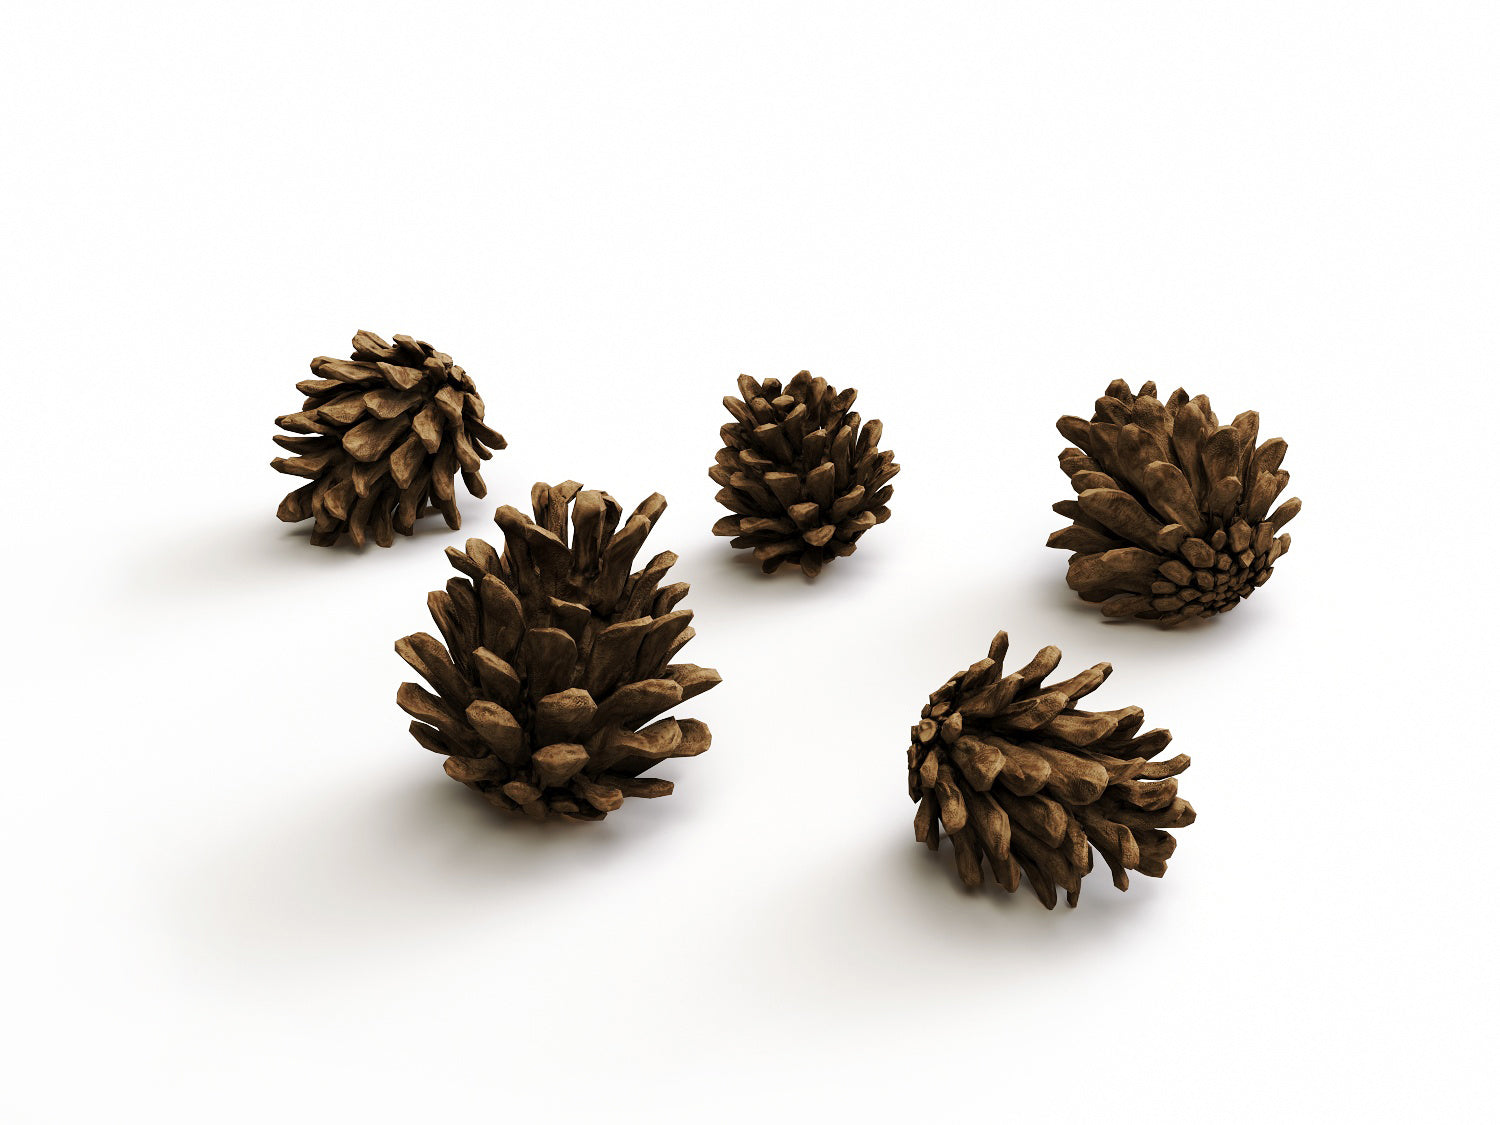 22,136 Small Pine Cones Images, Stock Photos, 3D objects, & Vectors